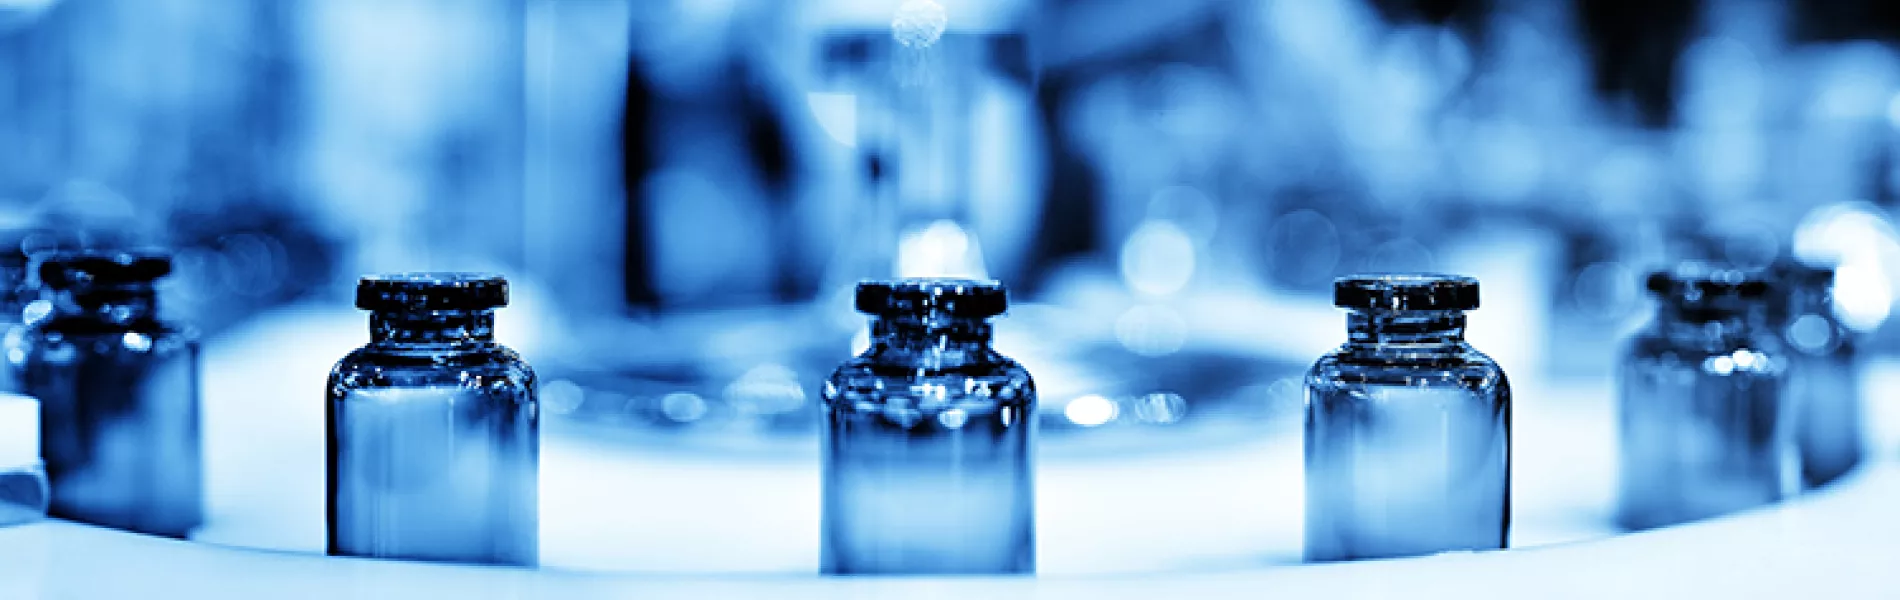 What Is Next in Manufacturing Injectable Sterile Products?